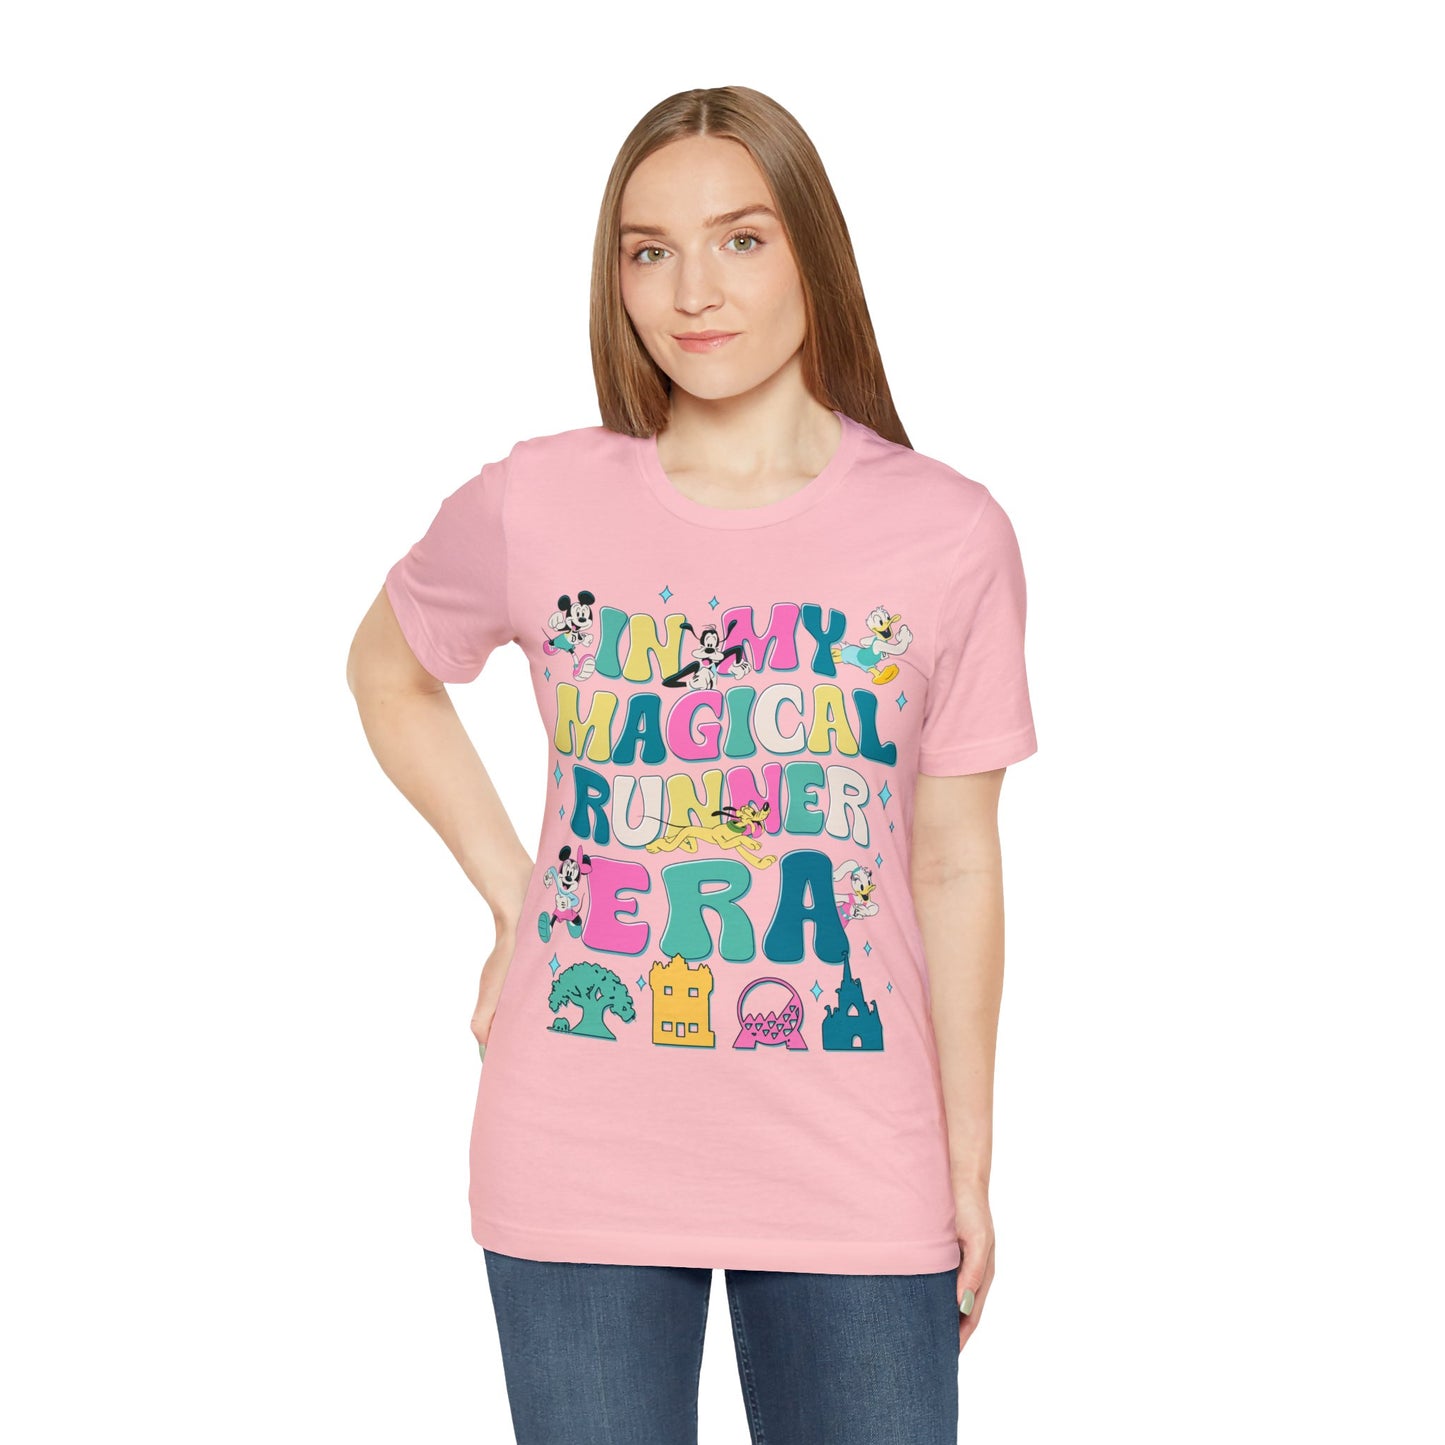 In My Magical Runner Era Unisex Graphic Tee - Multiple Colors